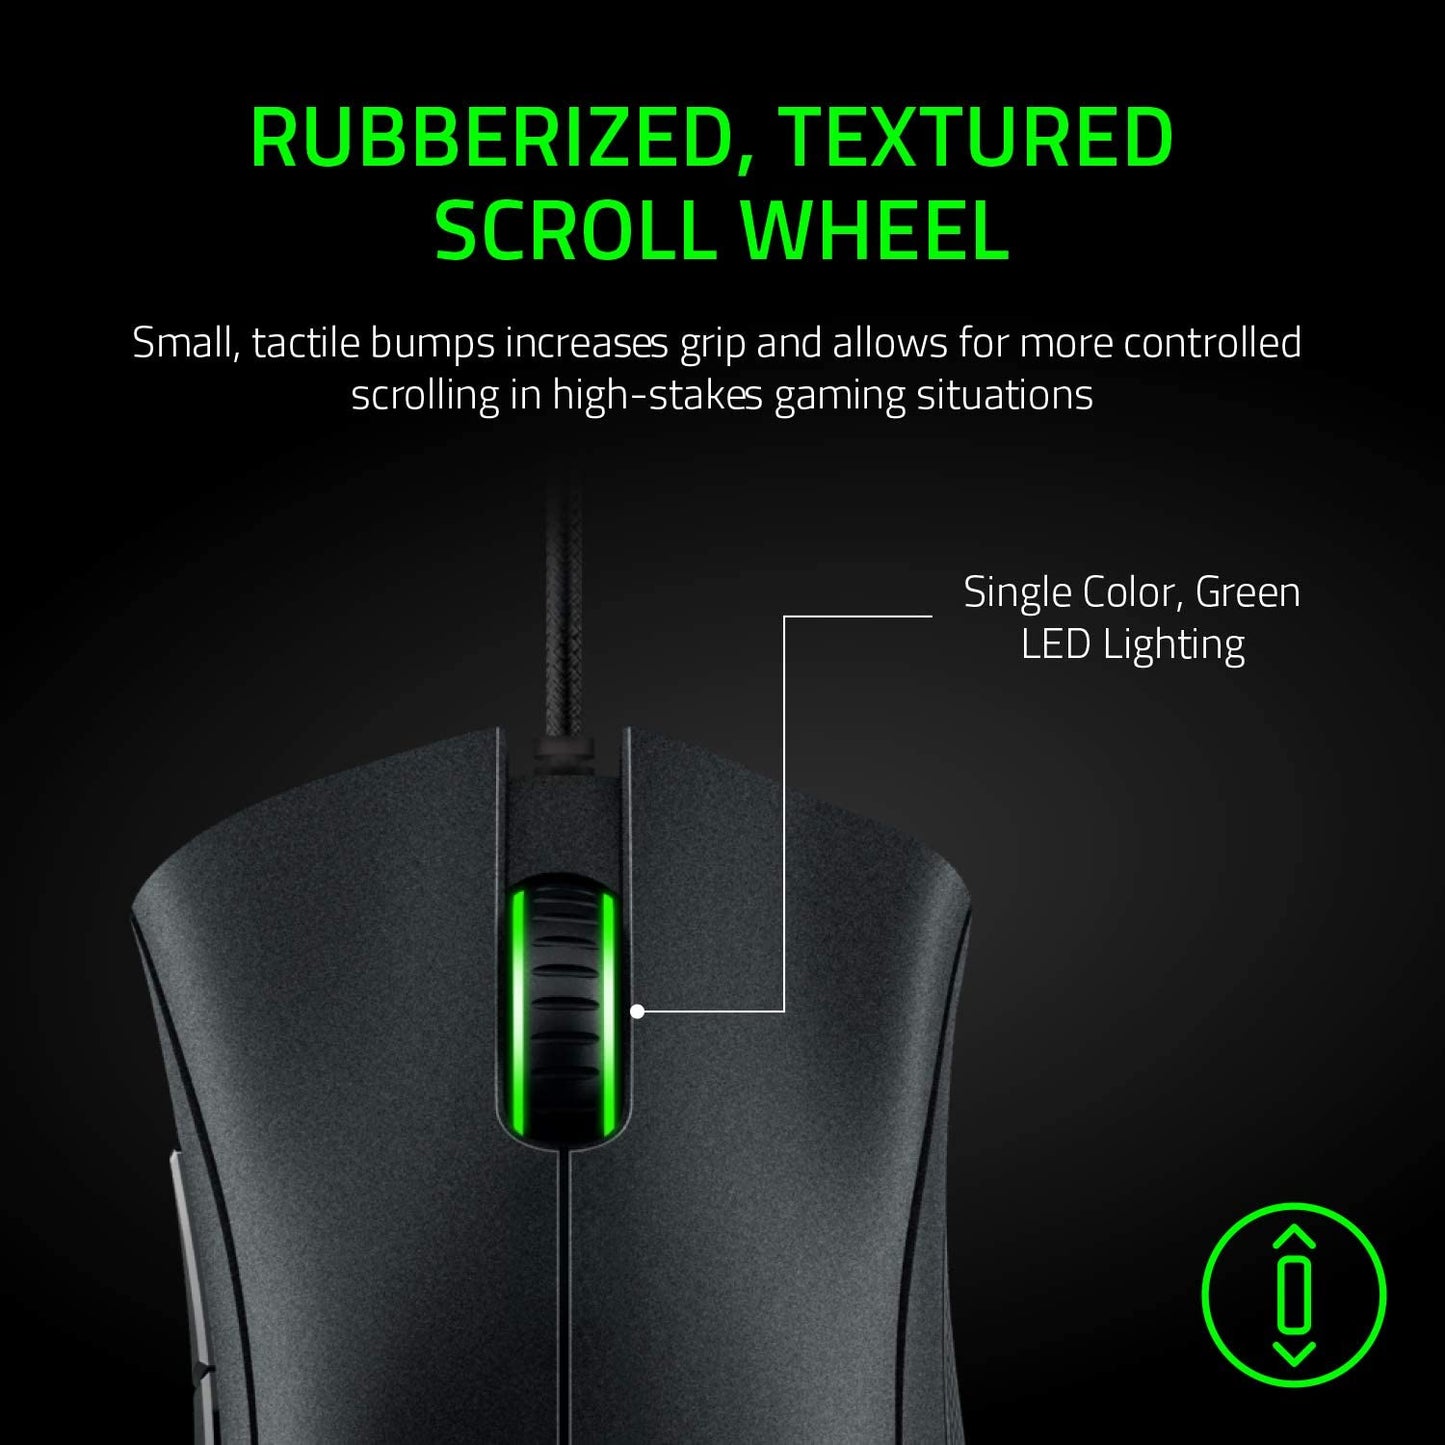 Razer DeathAdder Essential Gaming Mouse Mechanical Switches Rubber Side Grips Classic Black